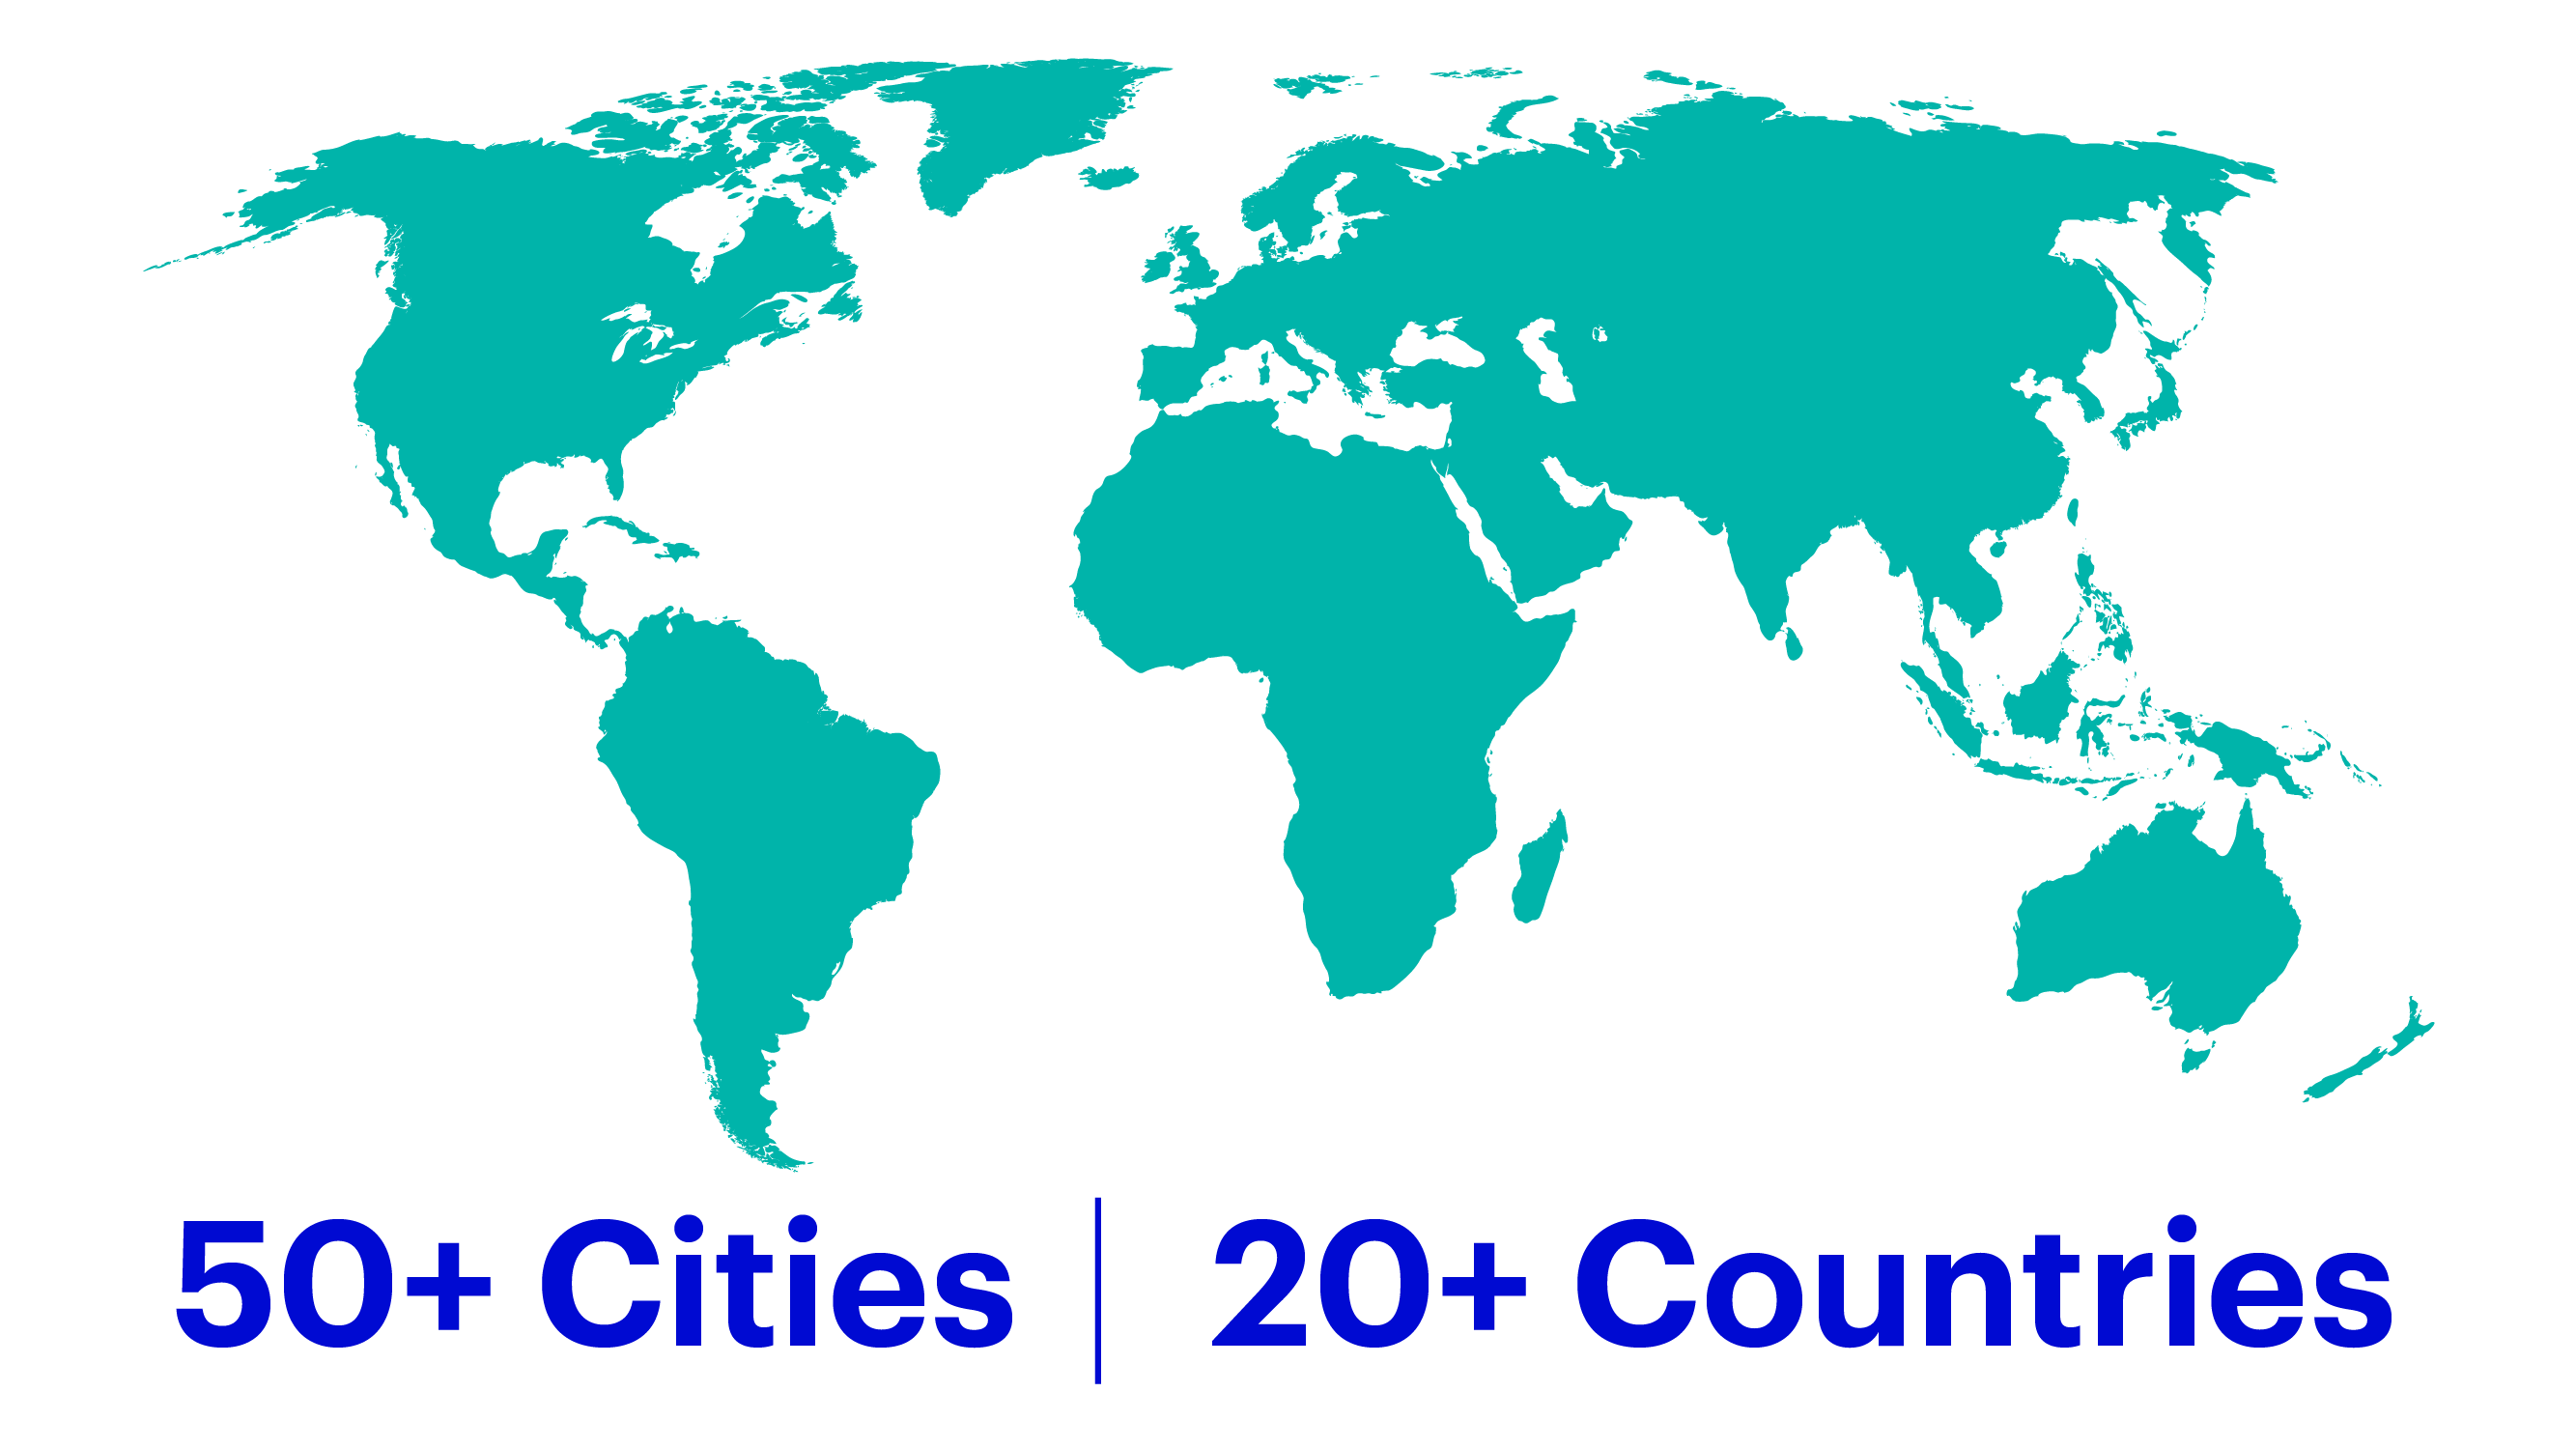 Employees across 27 countries